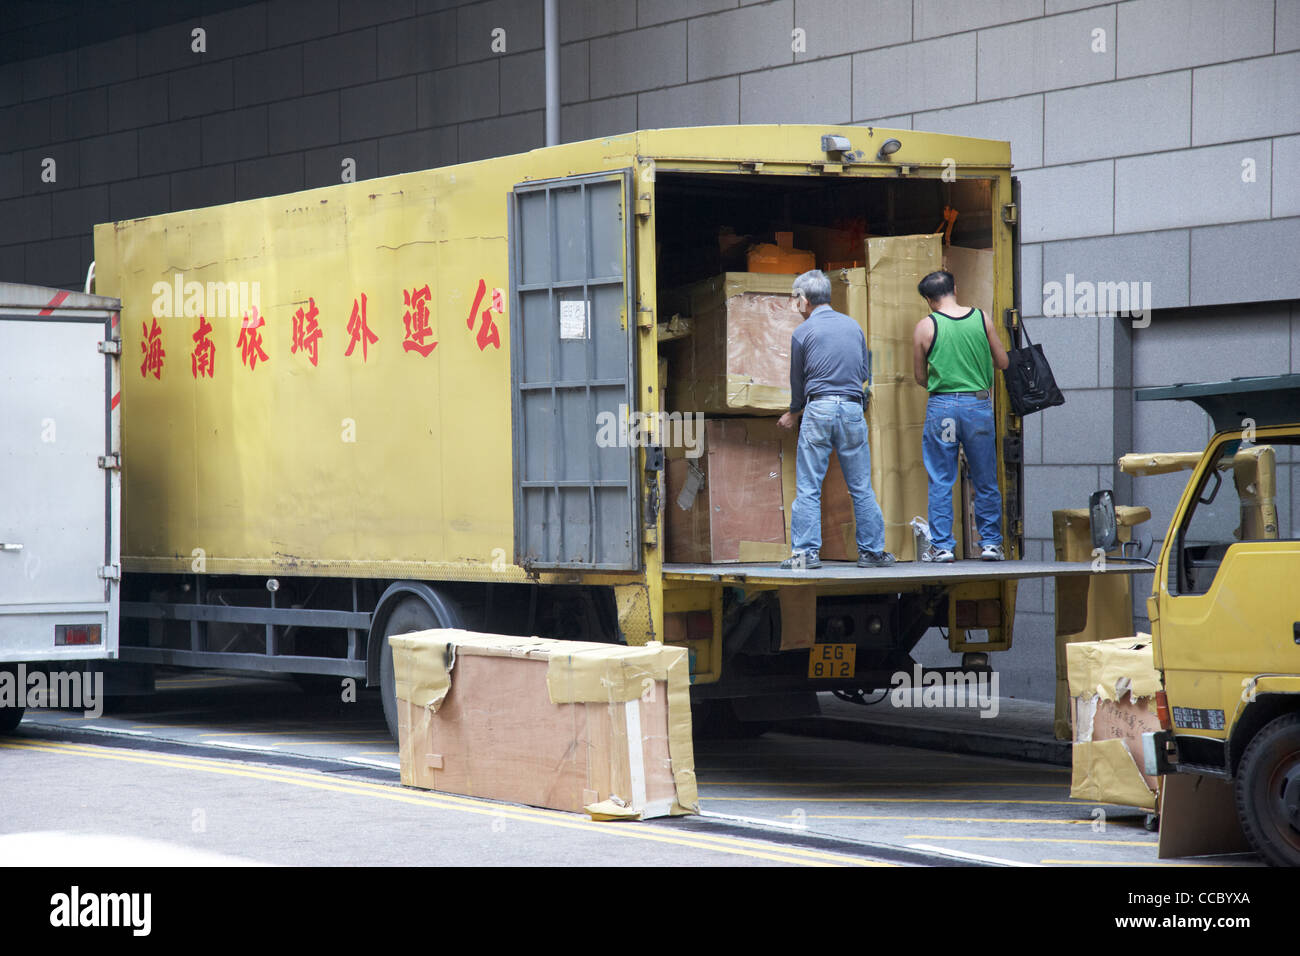 men loading unloading packing crates from the back of a tail lift van lorry hong kong hksar china asia Stock Photo